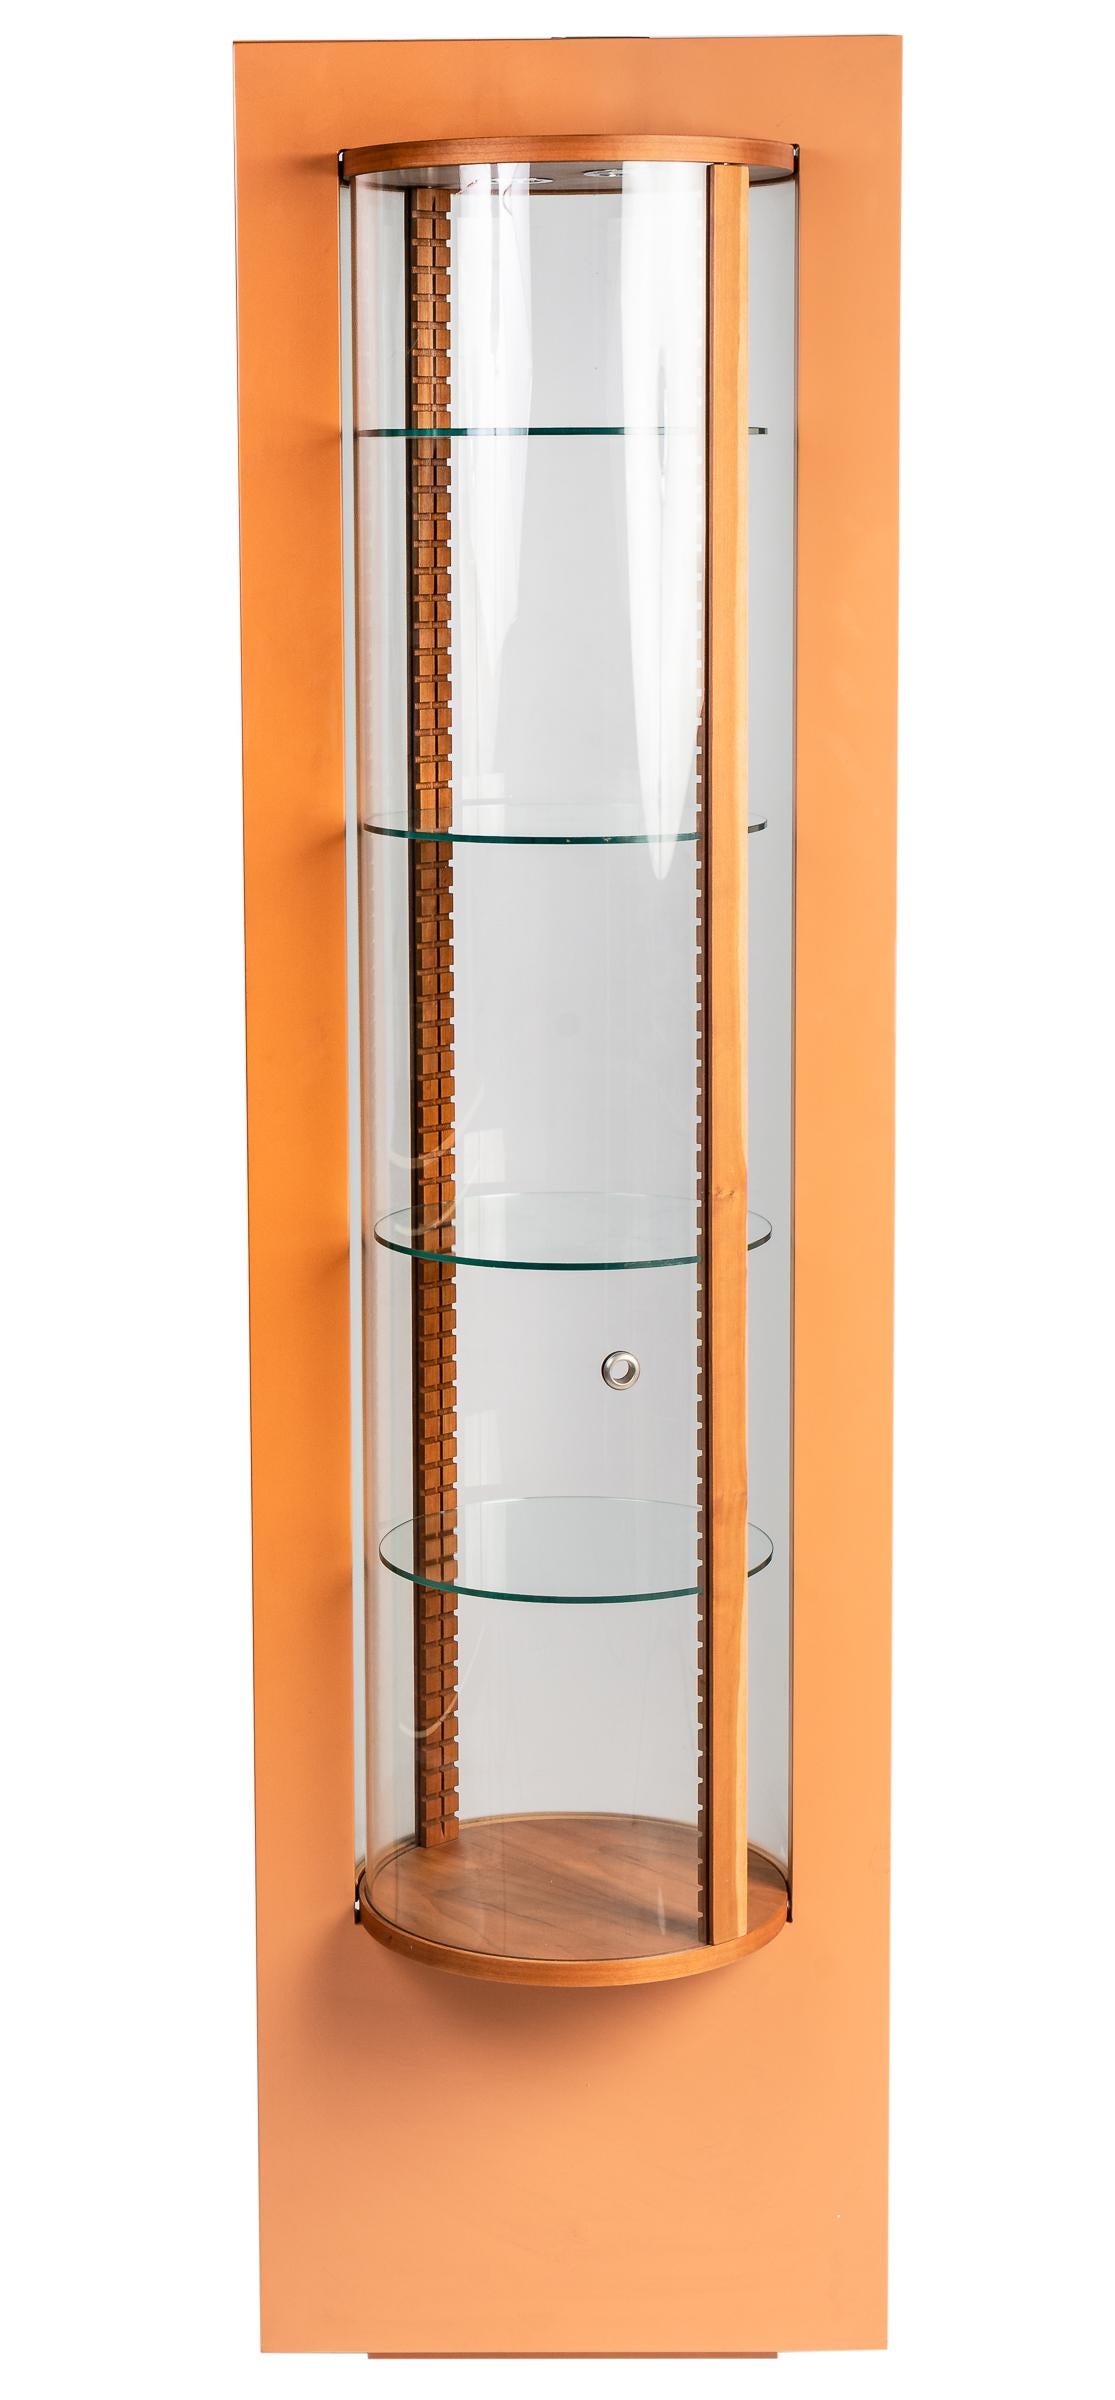 This beautiful illuminated display cabinet reveals the special design of Chr. Robert. The rounded glass panels turn in and can be opened in that way. The wooden structure gives the lighted glass cabinet a surrounding and the round glass shelves can